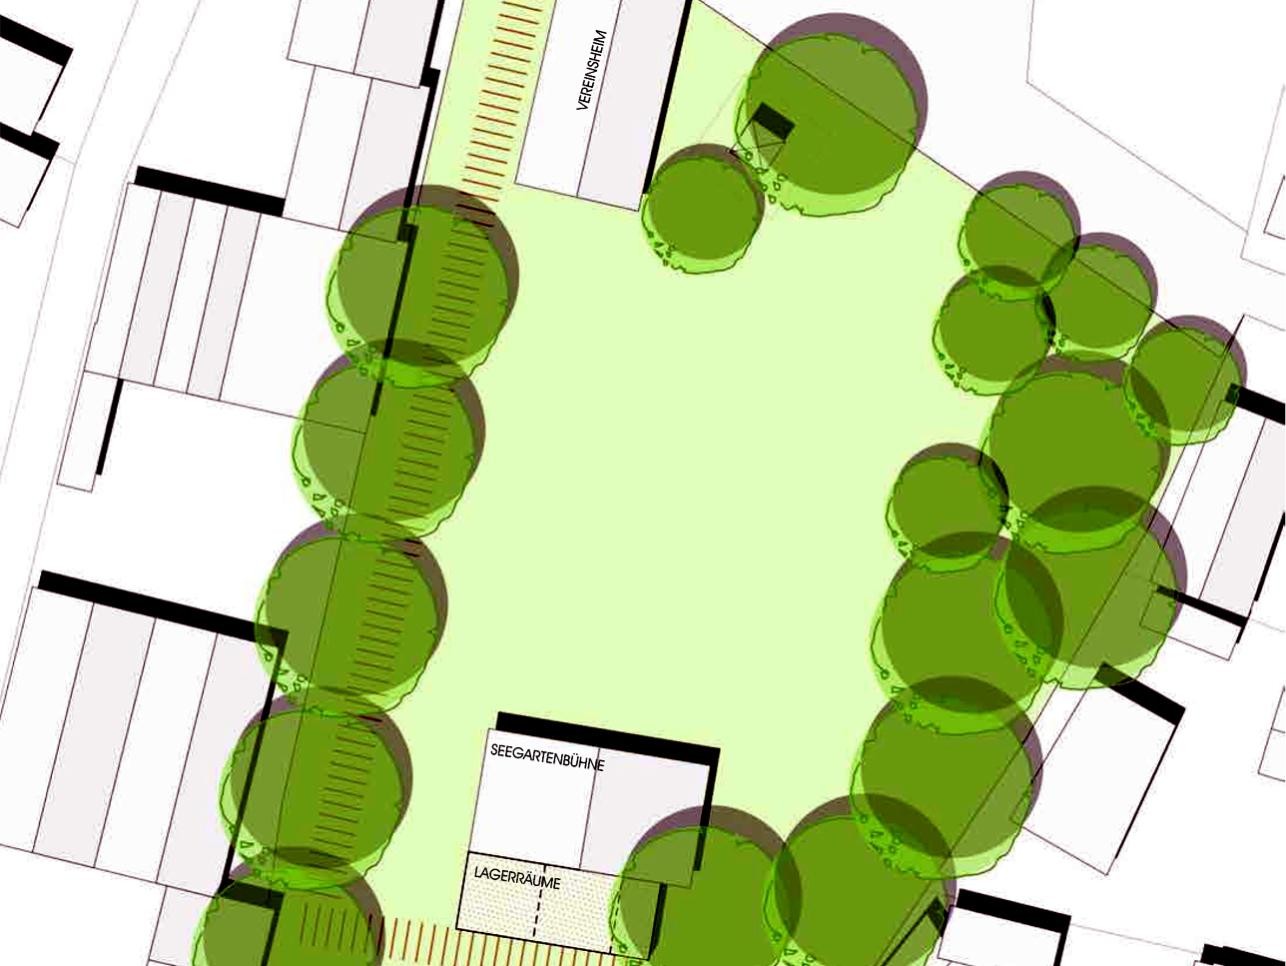 Plan Seegarten stage Wintersdorf with streets, houses and trees.